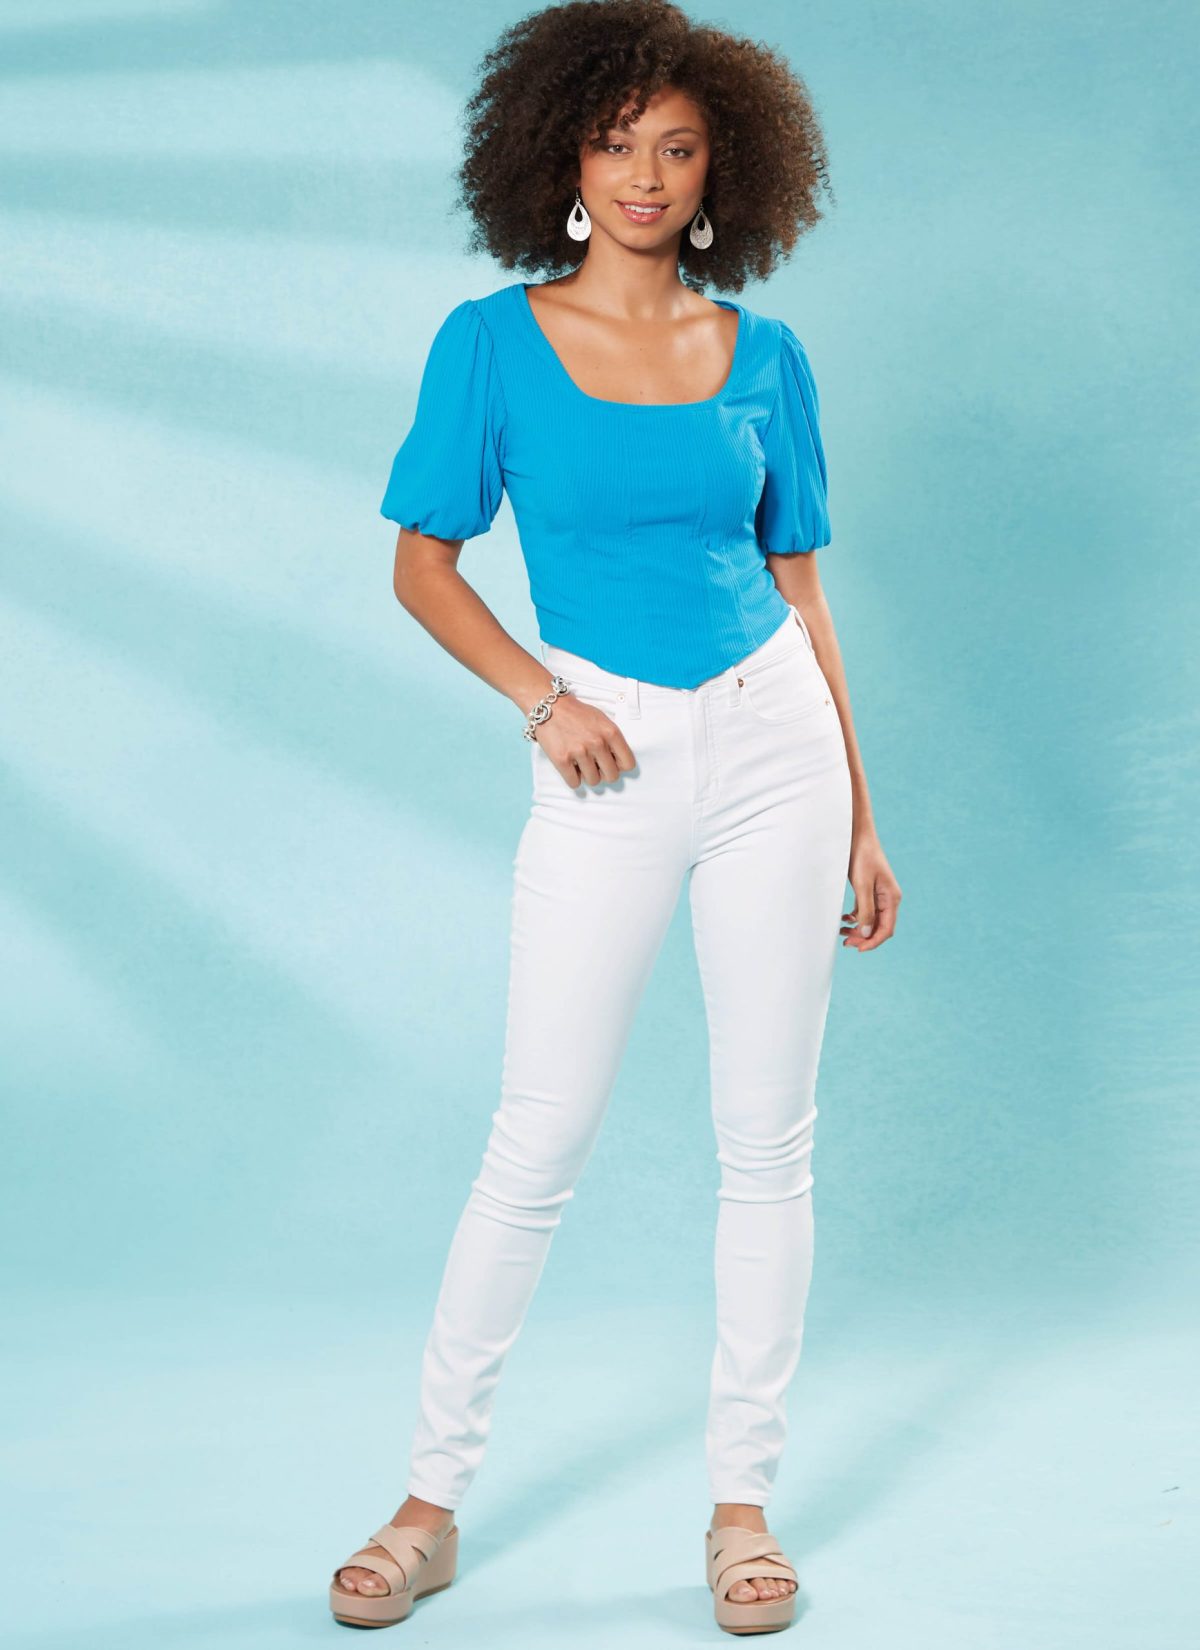 McCall's Sewing Pattern M8364 Misses' Knit Corset Tops